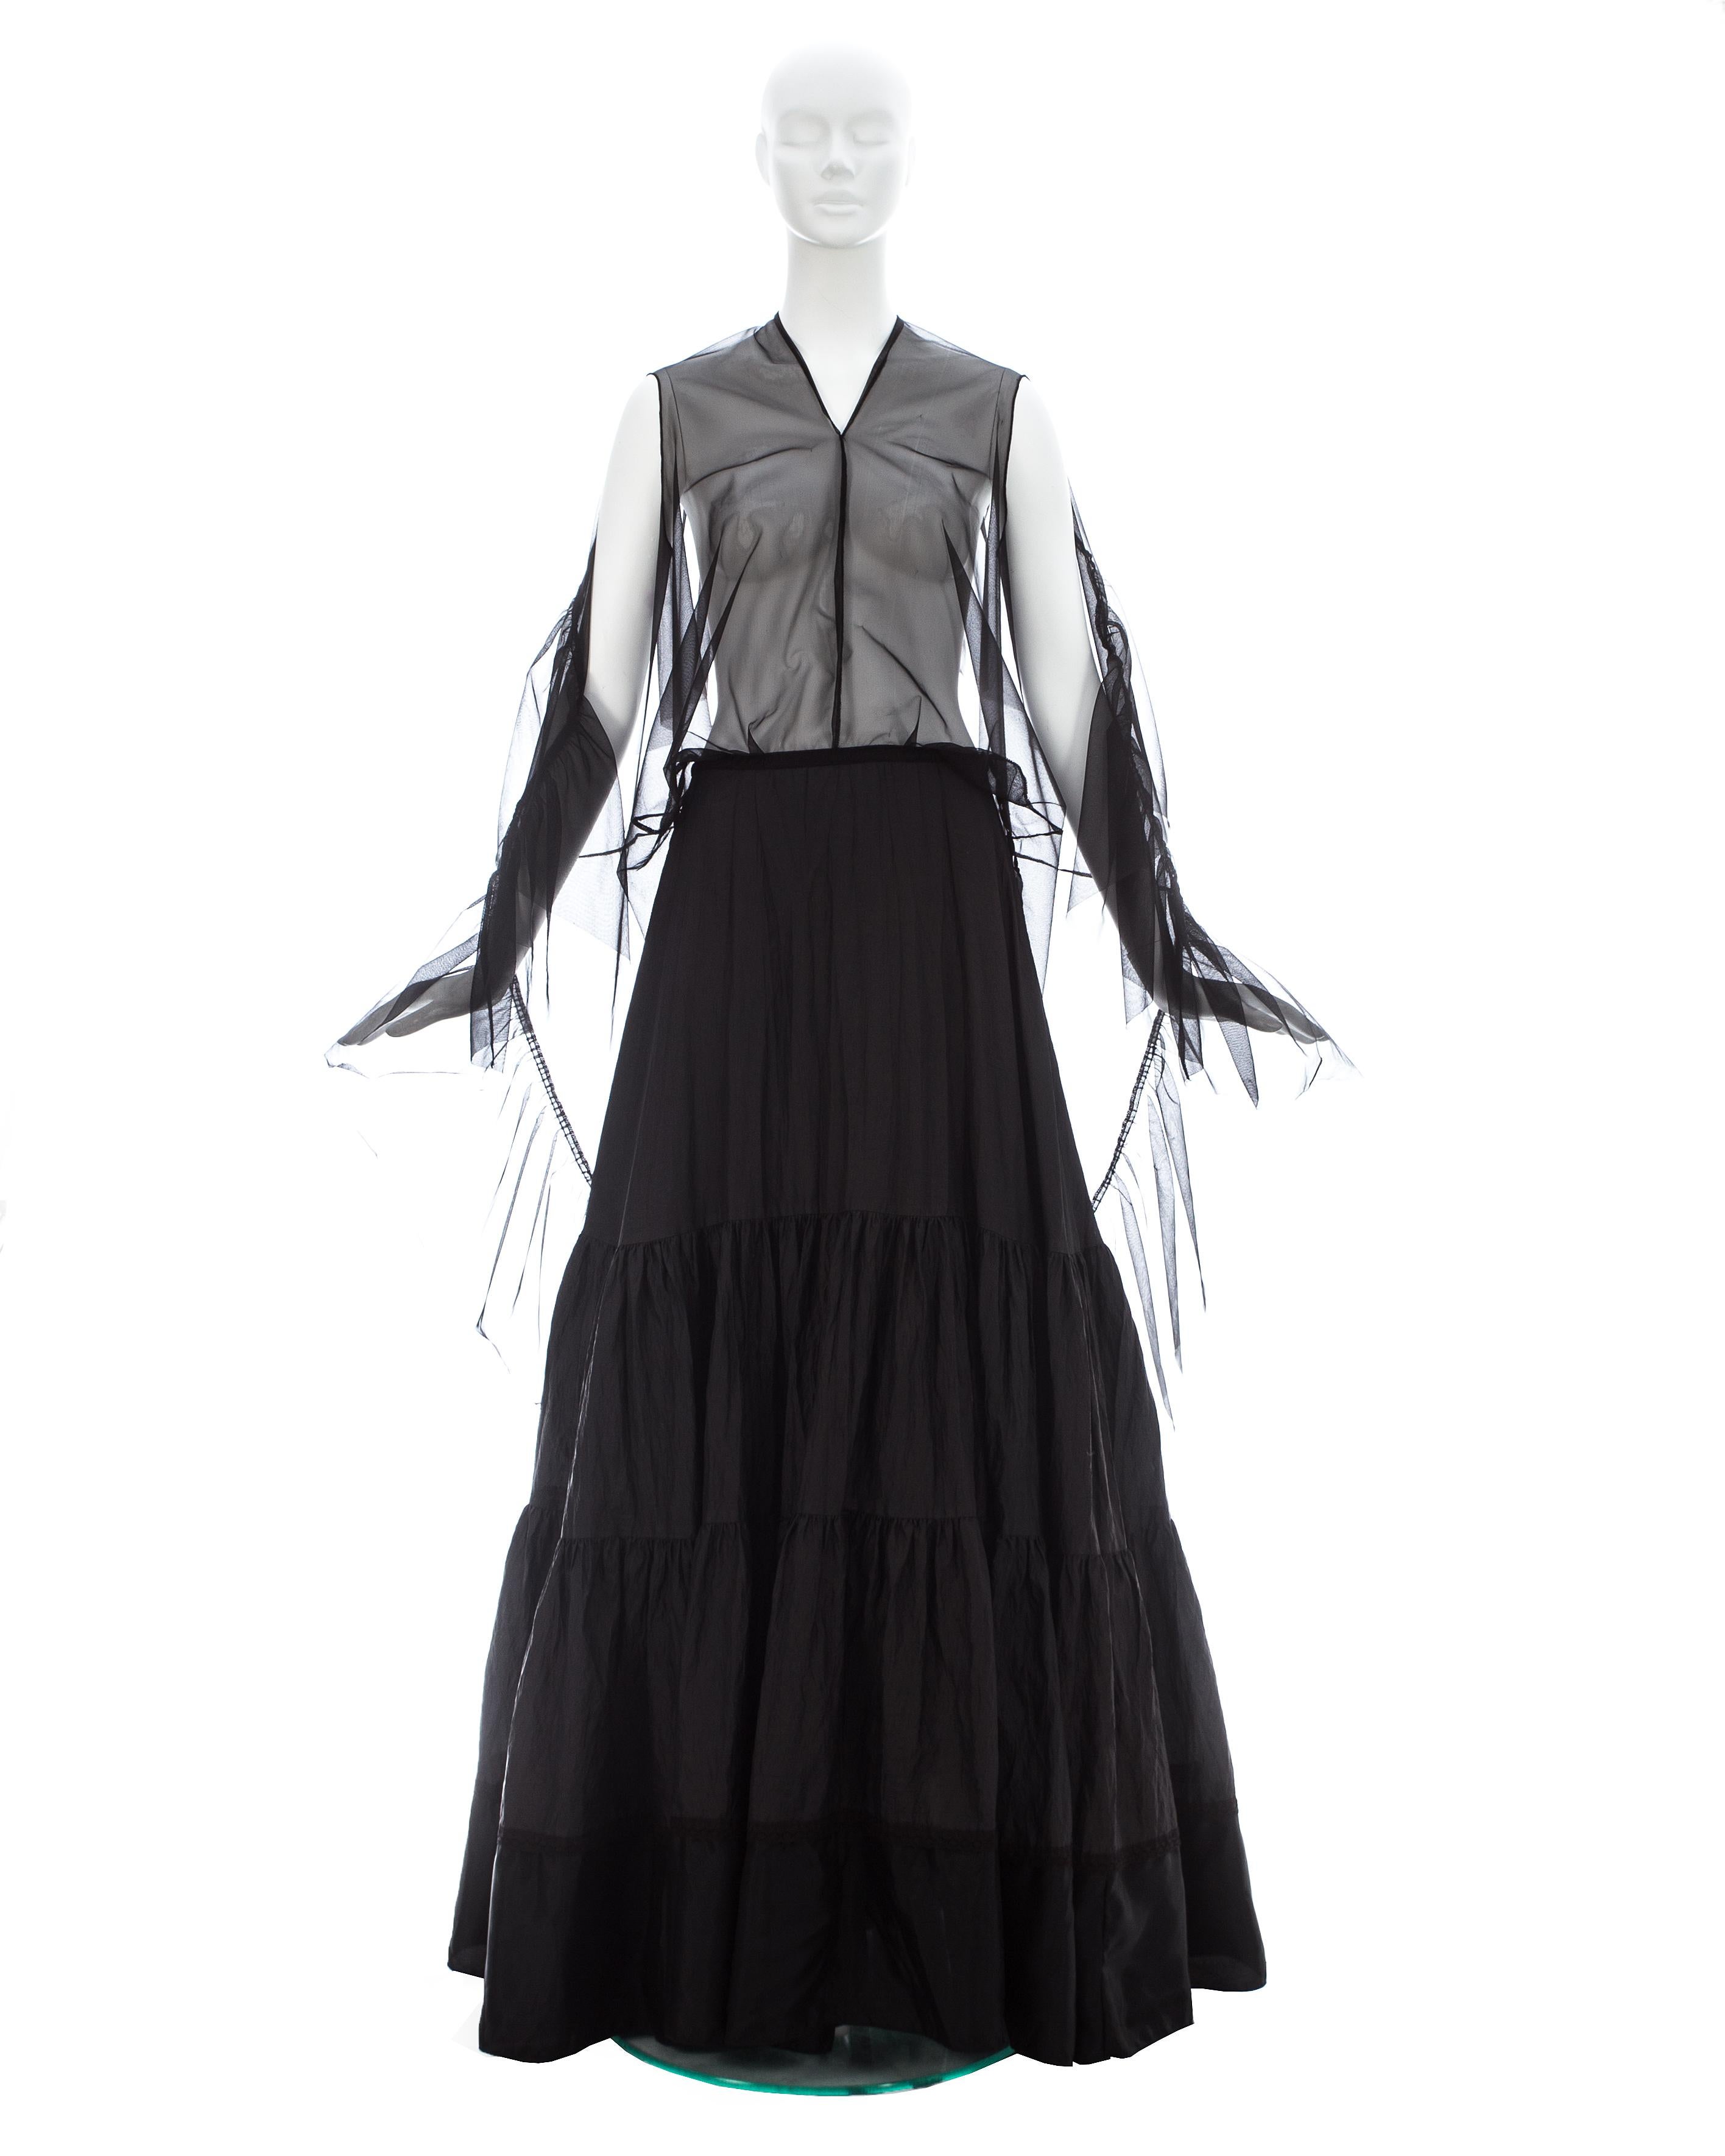 Margiela; Black nylon and polyester maxi dress made with vintage creased petticoats. The top layer of the skirt has a head and arm holes; transforming the skirt into a dress

Spring-Summer 2003